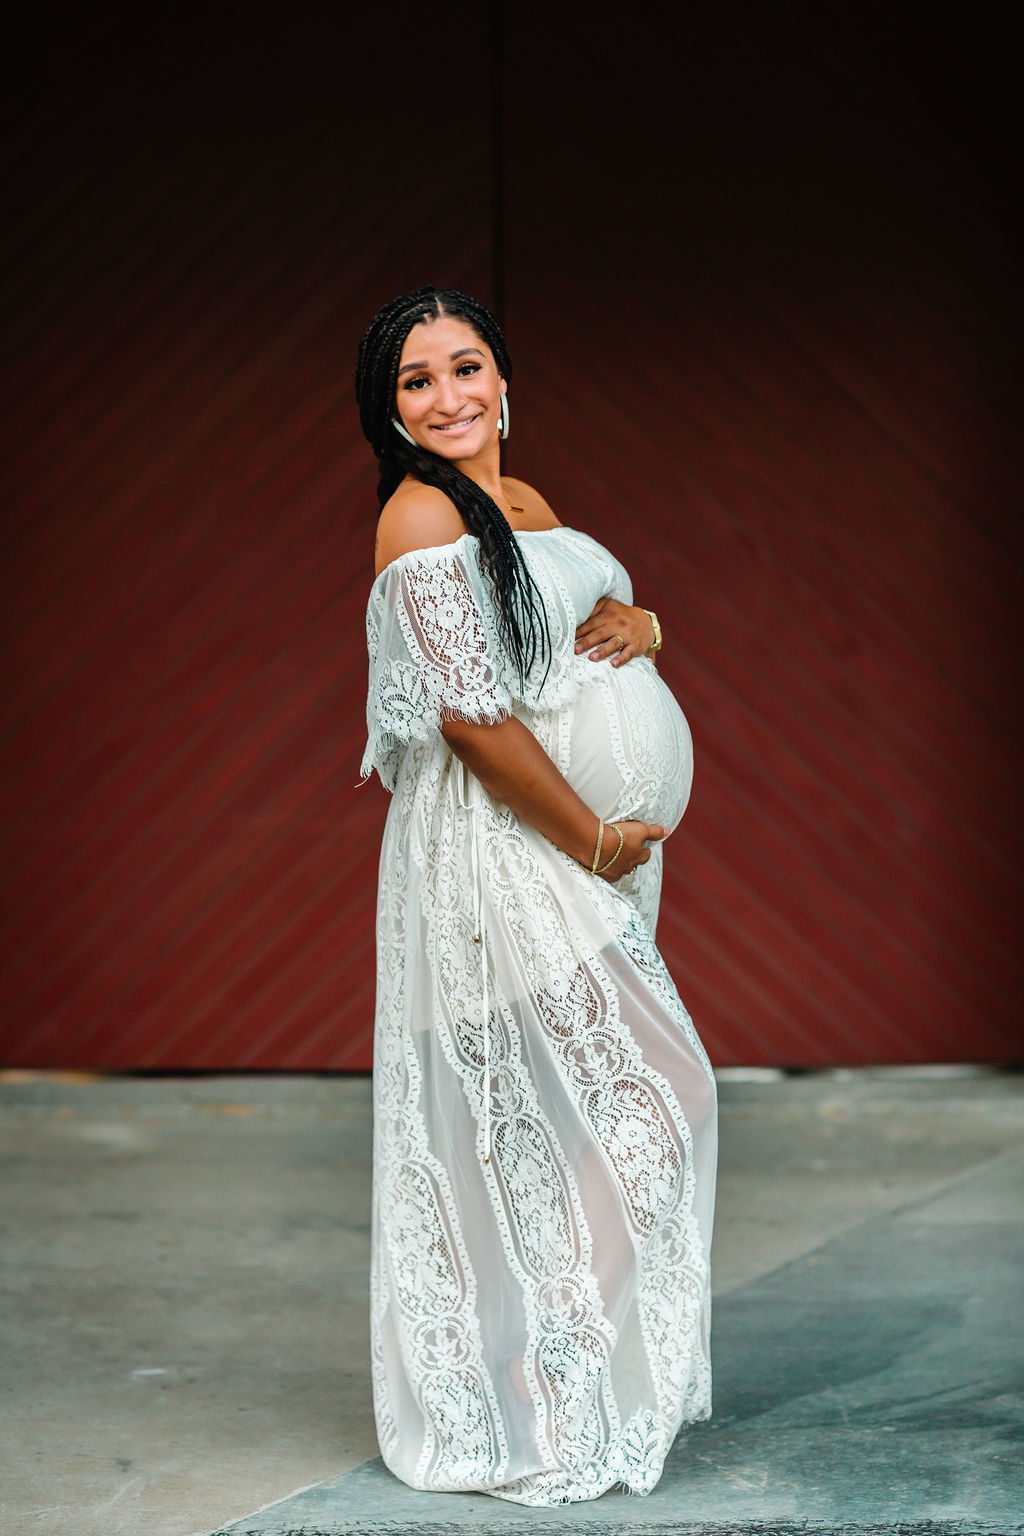 Mother to be stands in front of a red wall wearing a white maternity dress